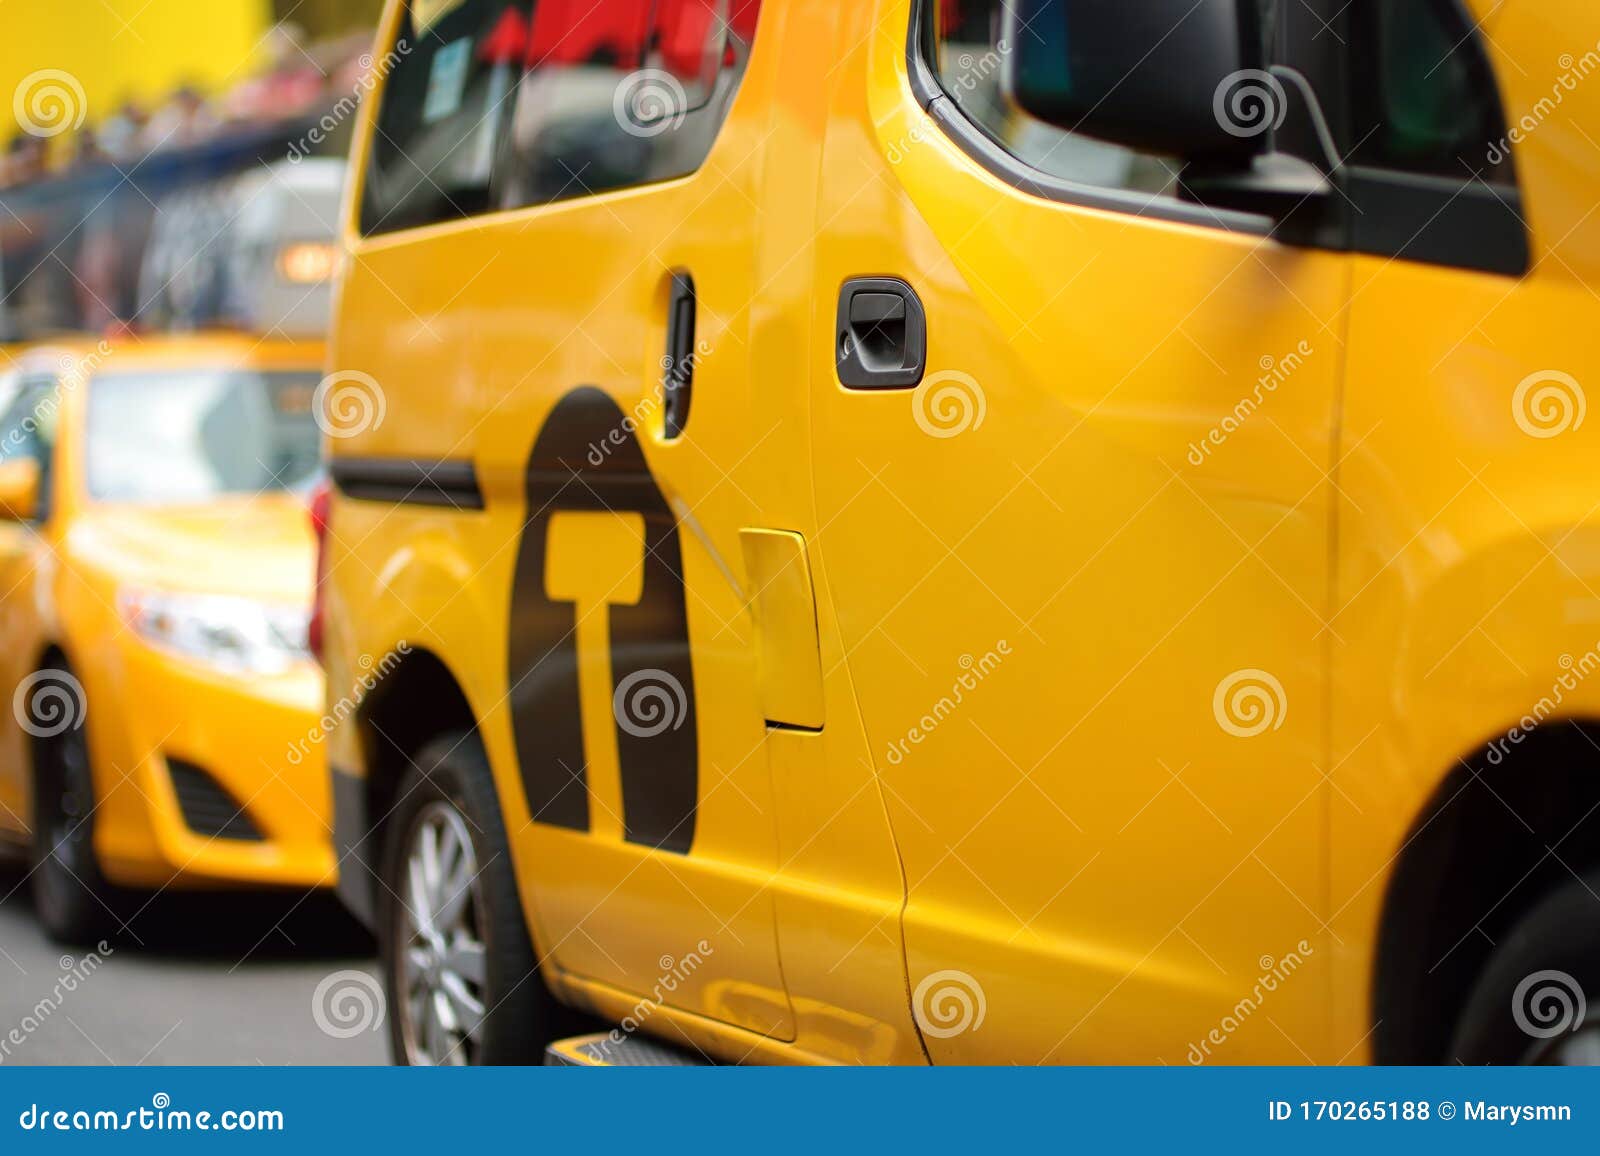 yellow cab cars in traffic on times square in manhattan, new york, usa